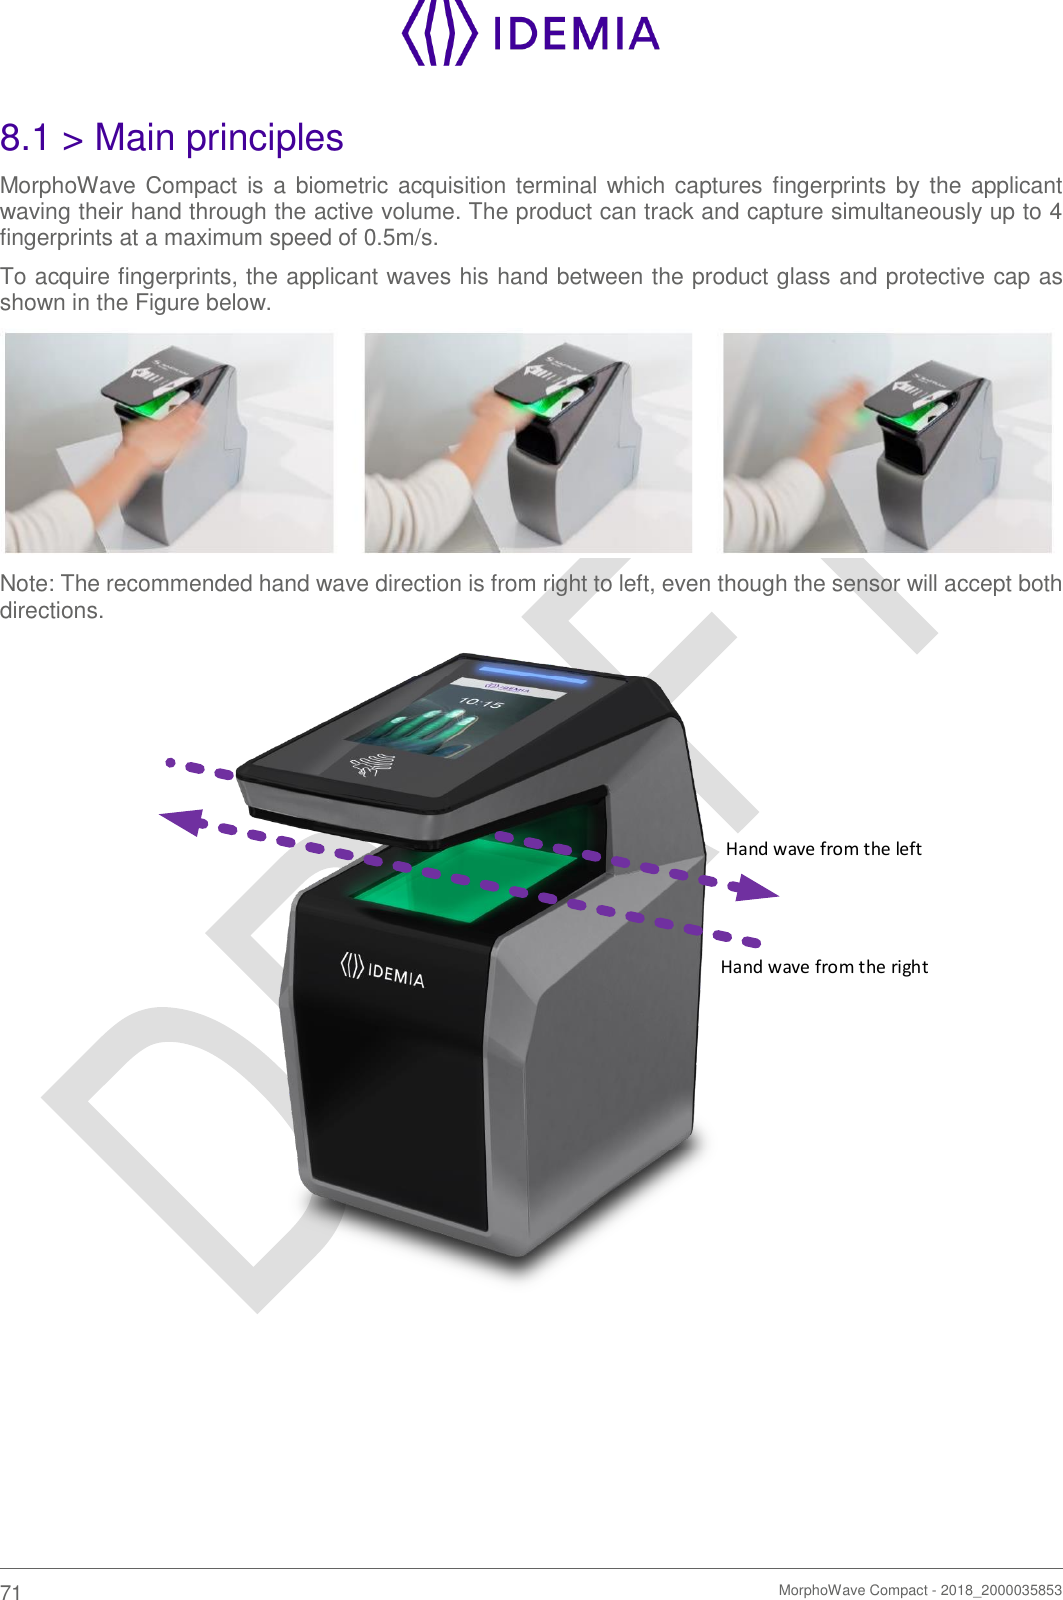    71   MorphoWave Compact - 2018_2000035853  8.1 &gt; Main principles MorphoWave Compact is a biometric acquisition terminal which captures  fingerprints by the applicant waving their hand through the active volume. The product can track and capture simultaneously up to 4 fingerprints at a maximum speed of 0.5m/s.  To acquire fingerprints, the applicant waves his hand between the product glass and protective cap as shown in the Figure below.  Note: The recommended hand wave direction is from right to left, even though the sensor will accept both directions. Hand wave from the rightHand wave from the left    